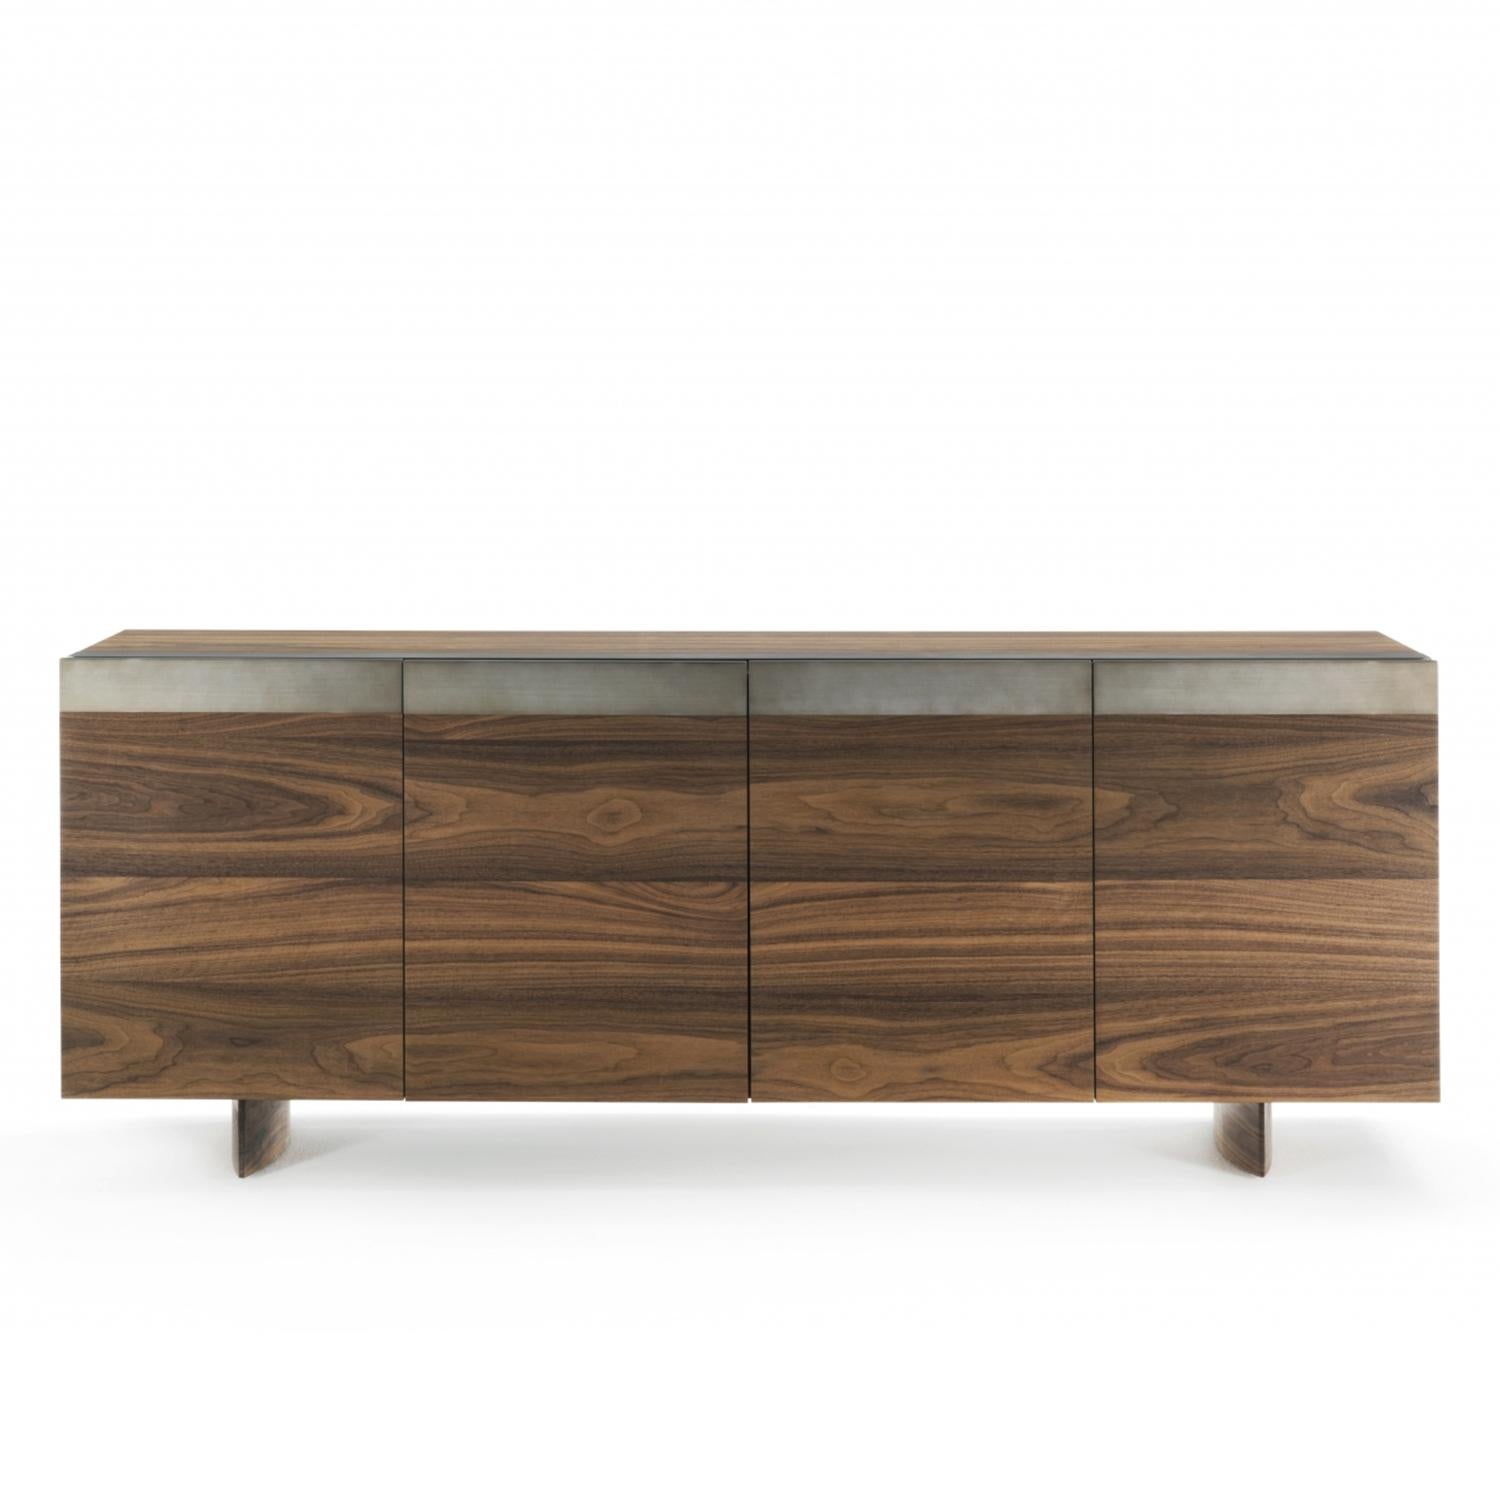 Sideboard all walnut with structure
in solid walnut, without knots. With iron handles
and trim in lacquered iron finish. With 4 doors
and 2 central drawers inside. Treated solid
wood with wax with natural pine extracts.
Also available in oak in